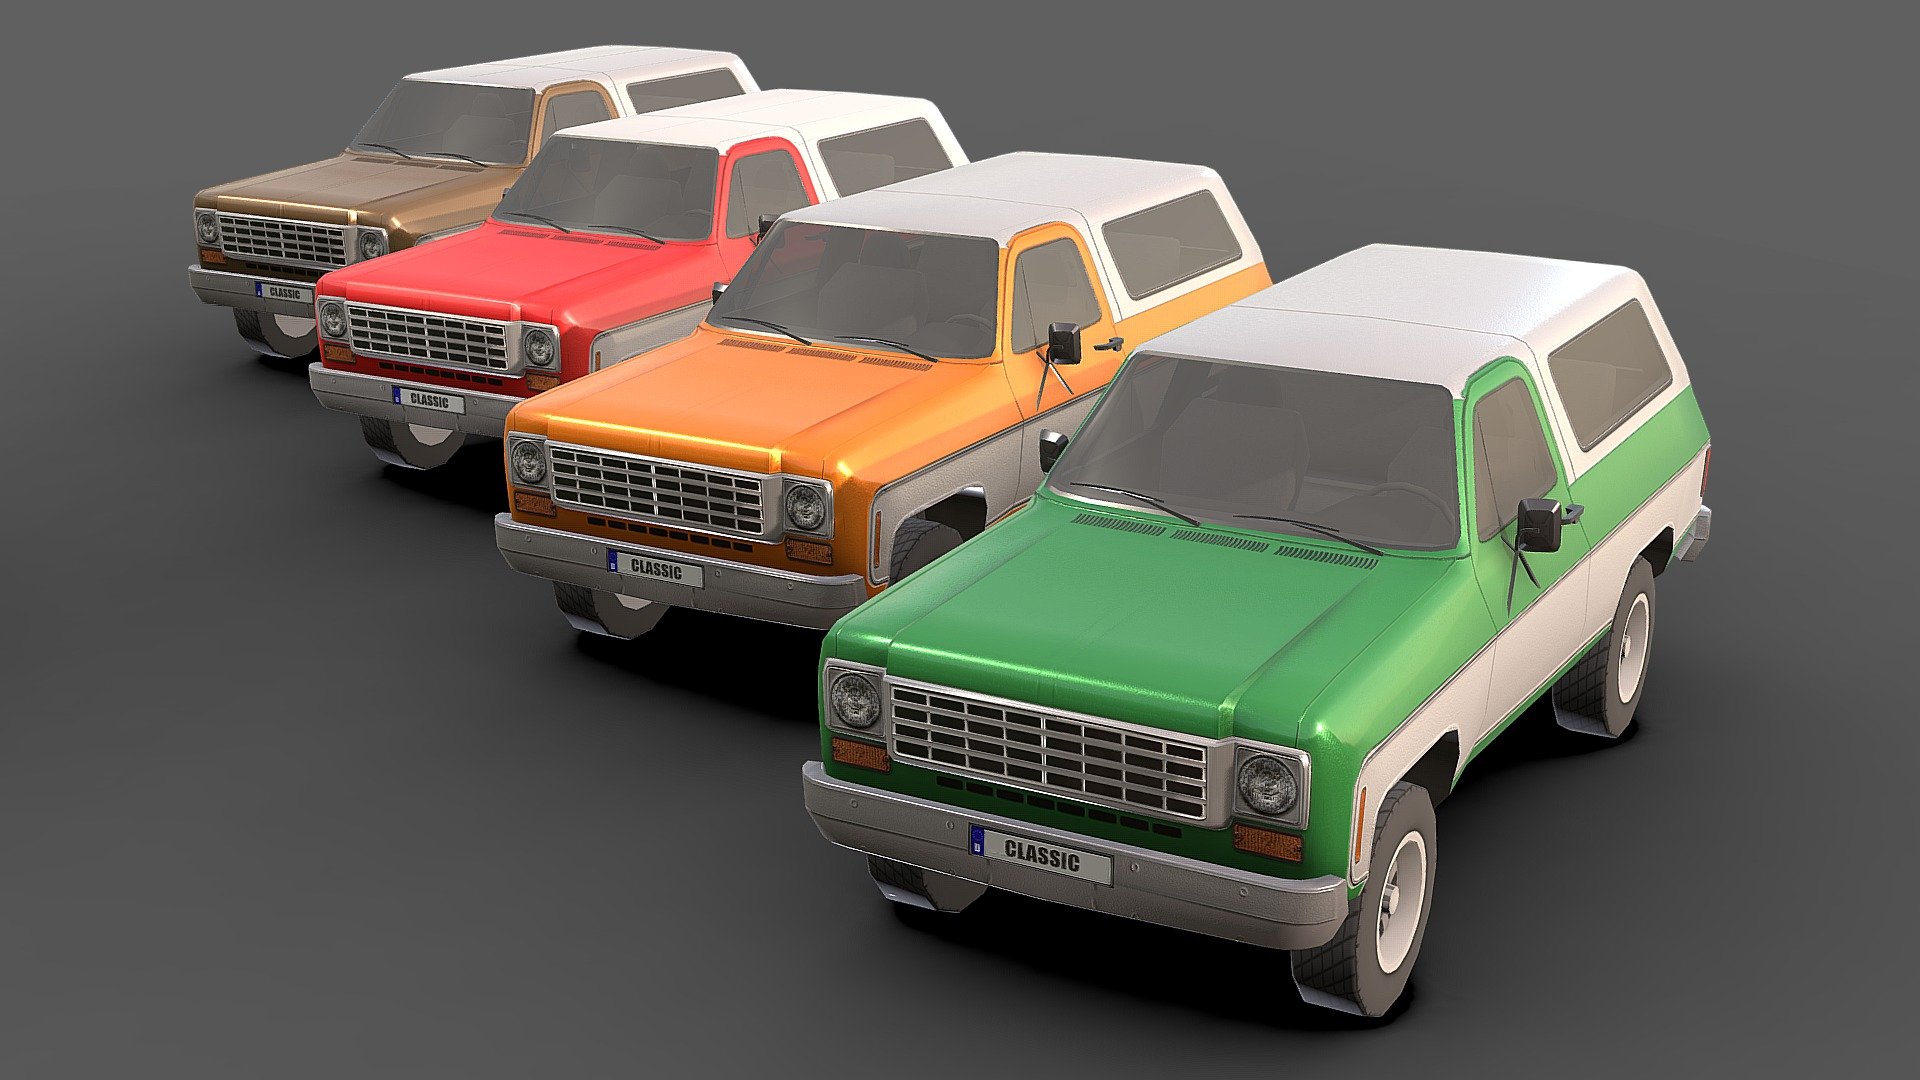 Classic Car # 3 .

You can use these models in any game and project.

This model is made with order and precision.

Separated parts (bodys . wheels . Steer ).

This car has 5 different colors.

Very Low- Poly.

The interior of this car is very low poly.

Average poly count: 5,000 tris.

It has a normal map texture .

Texture size: 2048 / 1024 / 512 (PNG).

It has a UV map texture.

Number of textures: 3.

Number of materials: 4.

Format: Fbx / Obj / 3DMax .

The original files are in the Additional file .

Wait for my new models.. Your friend (Sidra) 3d model